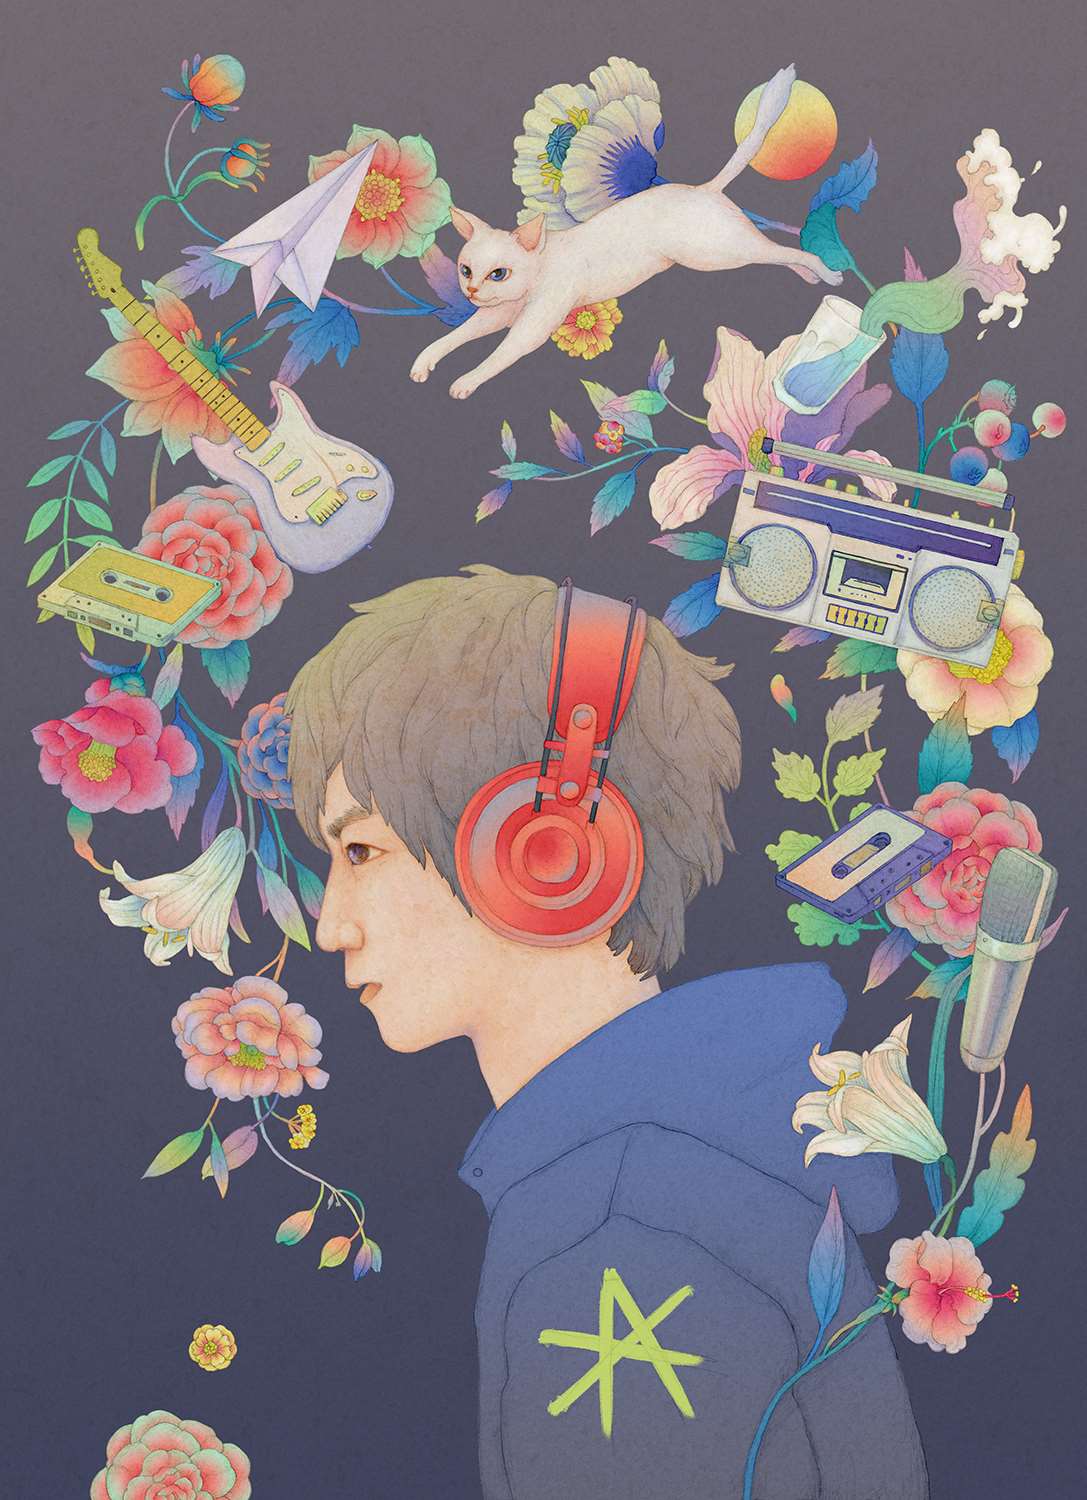 Whooli Chen, Male character with headphones by Whooli Chen